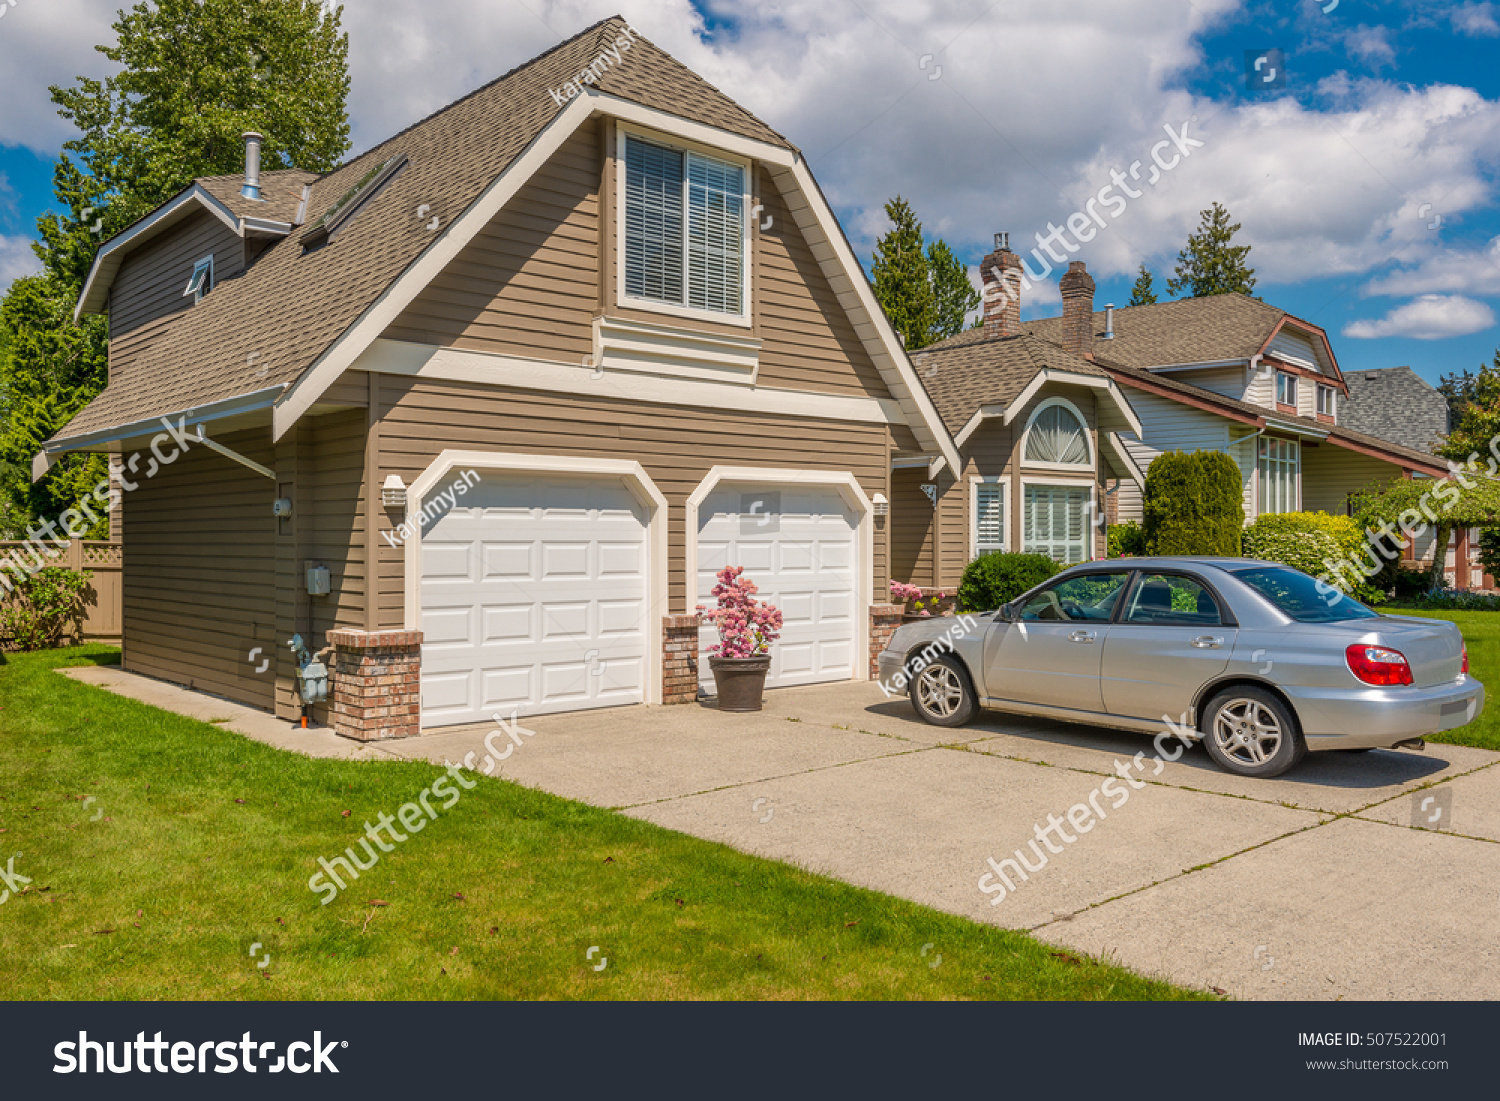 Front View House Car Parking Front Stock Photo 2936612 | Shutterstock